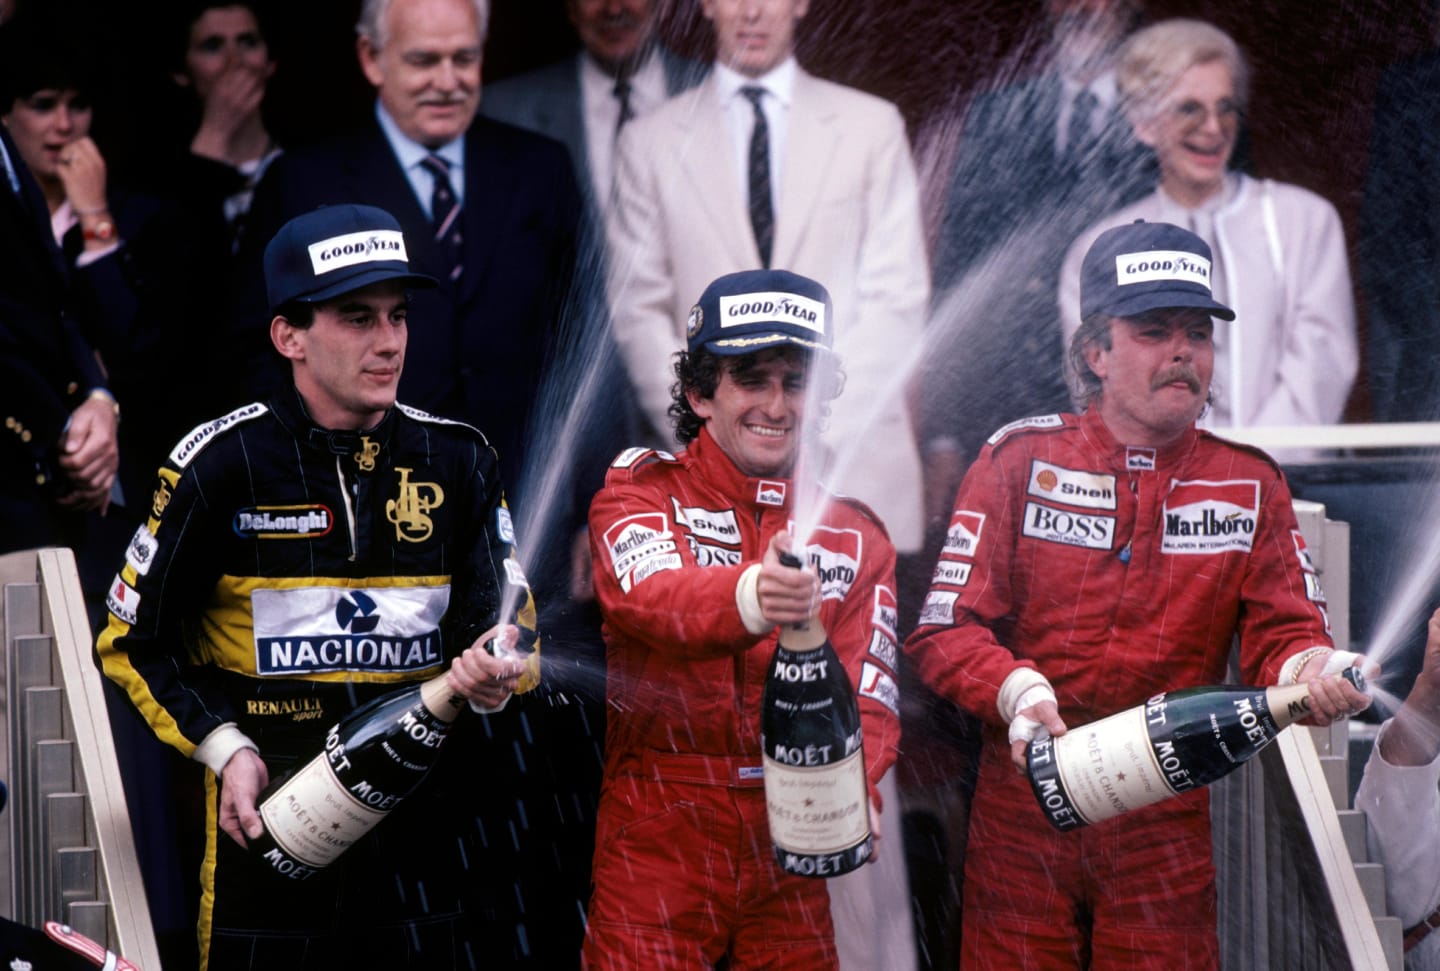 The podium finishers celebrate in front of the Principality Royalty (L to R): Ayrton Senna (BRA)